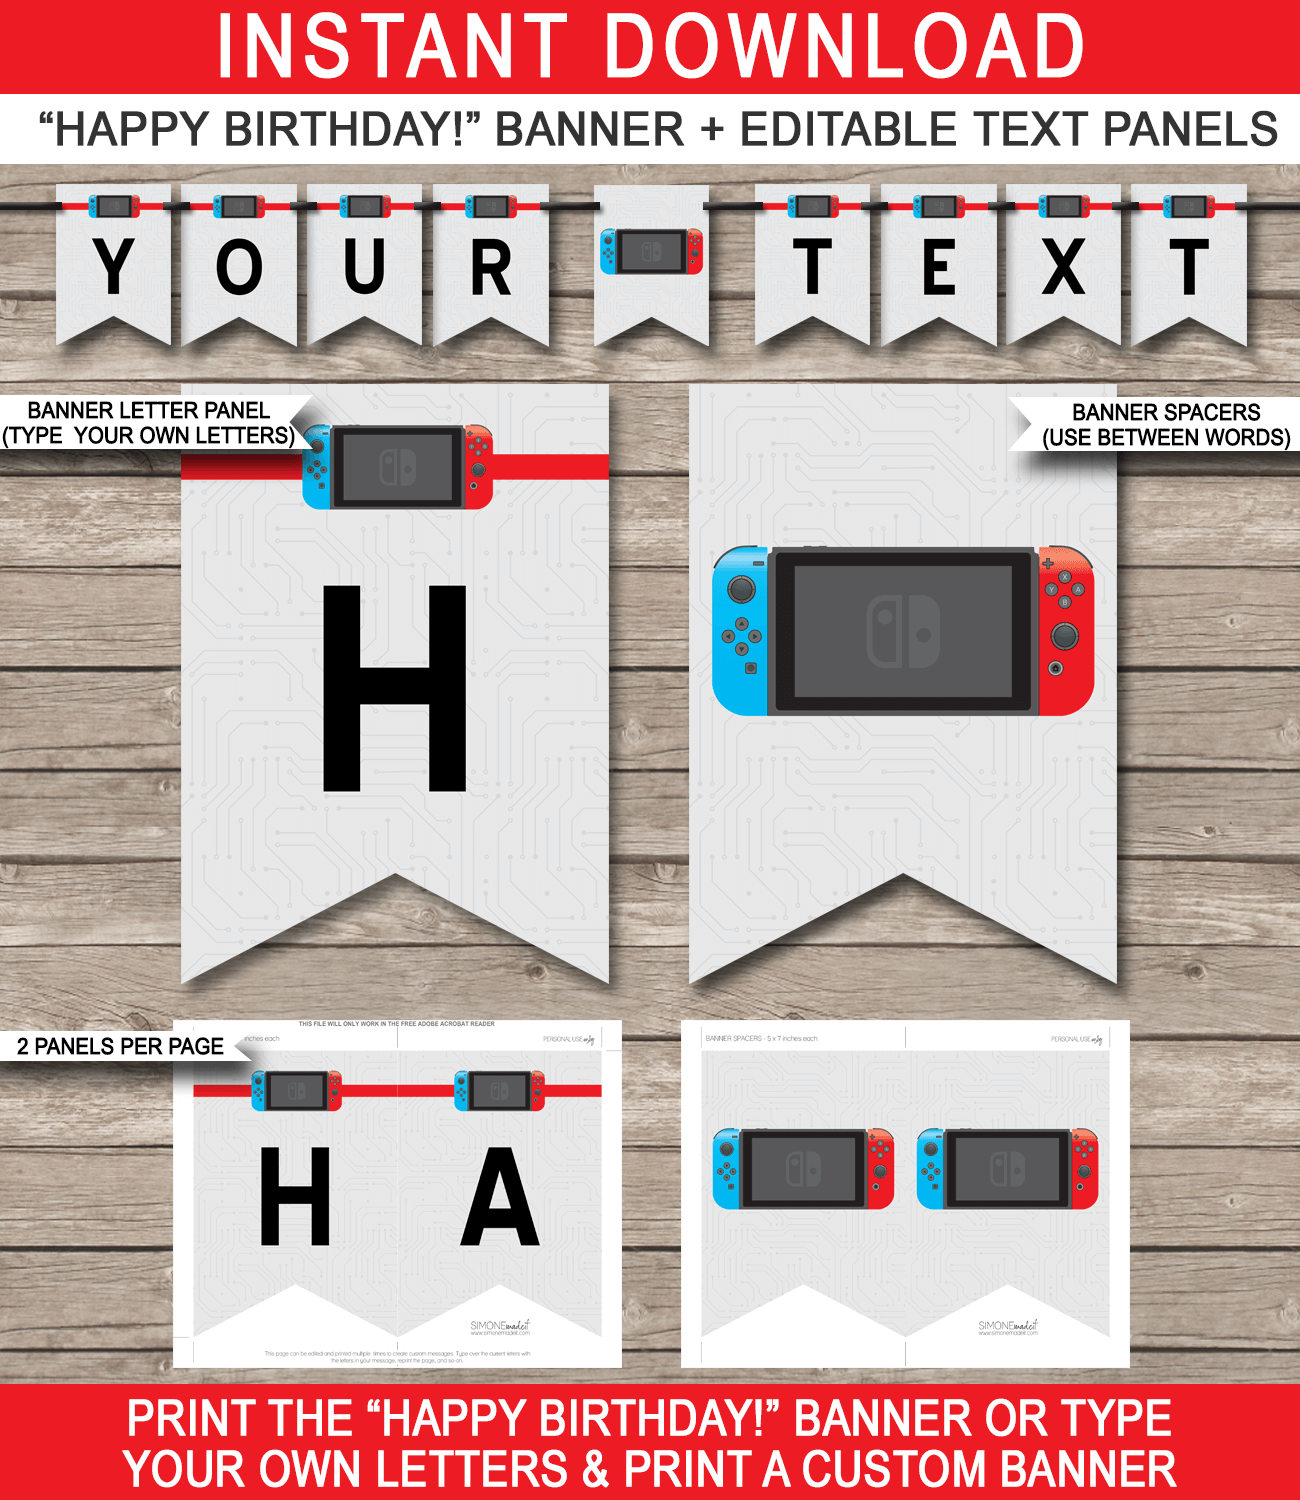 Nintendo Switch Pennant Banner Template - Video Game Theme Birthday Party Decorations - Happy Birthday Banner - Instant Download via simonemadeit.com